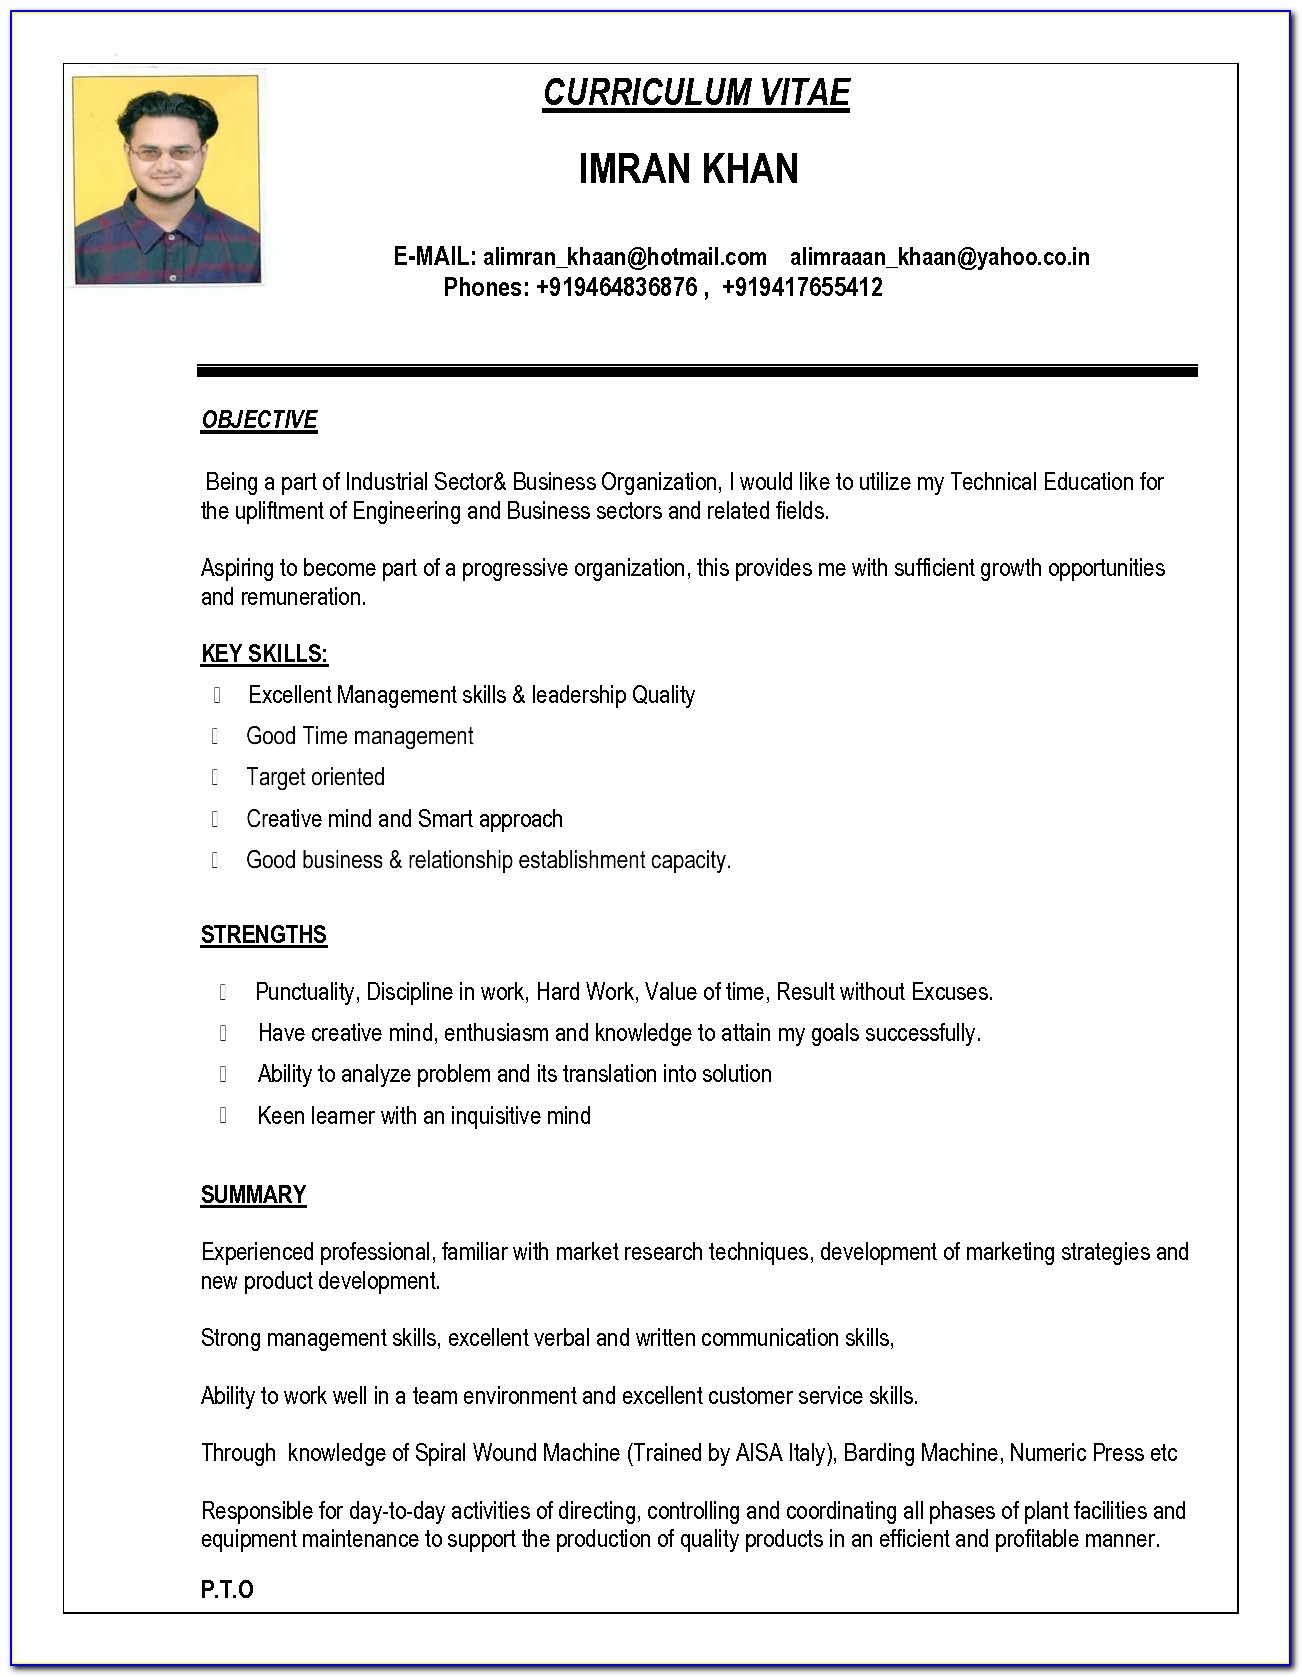 Matrimonial Resume Format Doc | Resume Format With Biodata Format For Marriage For Girl In Hindu Doc